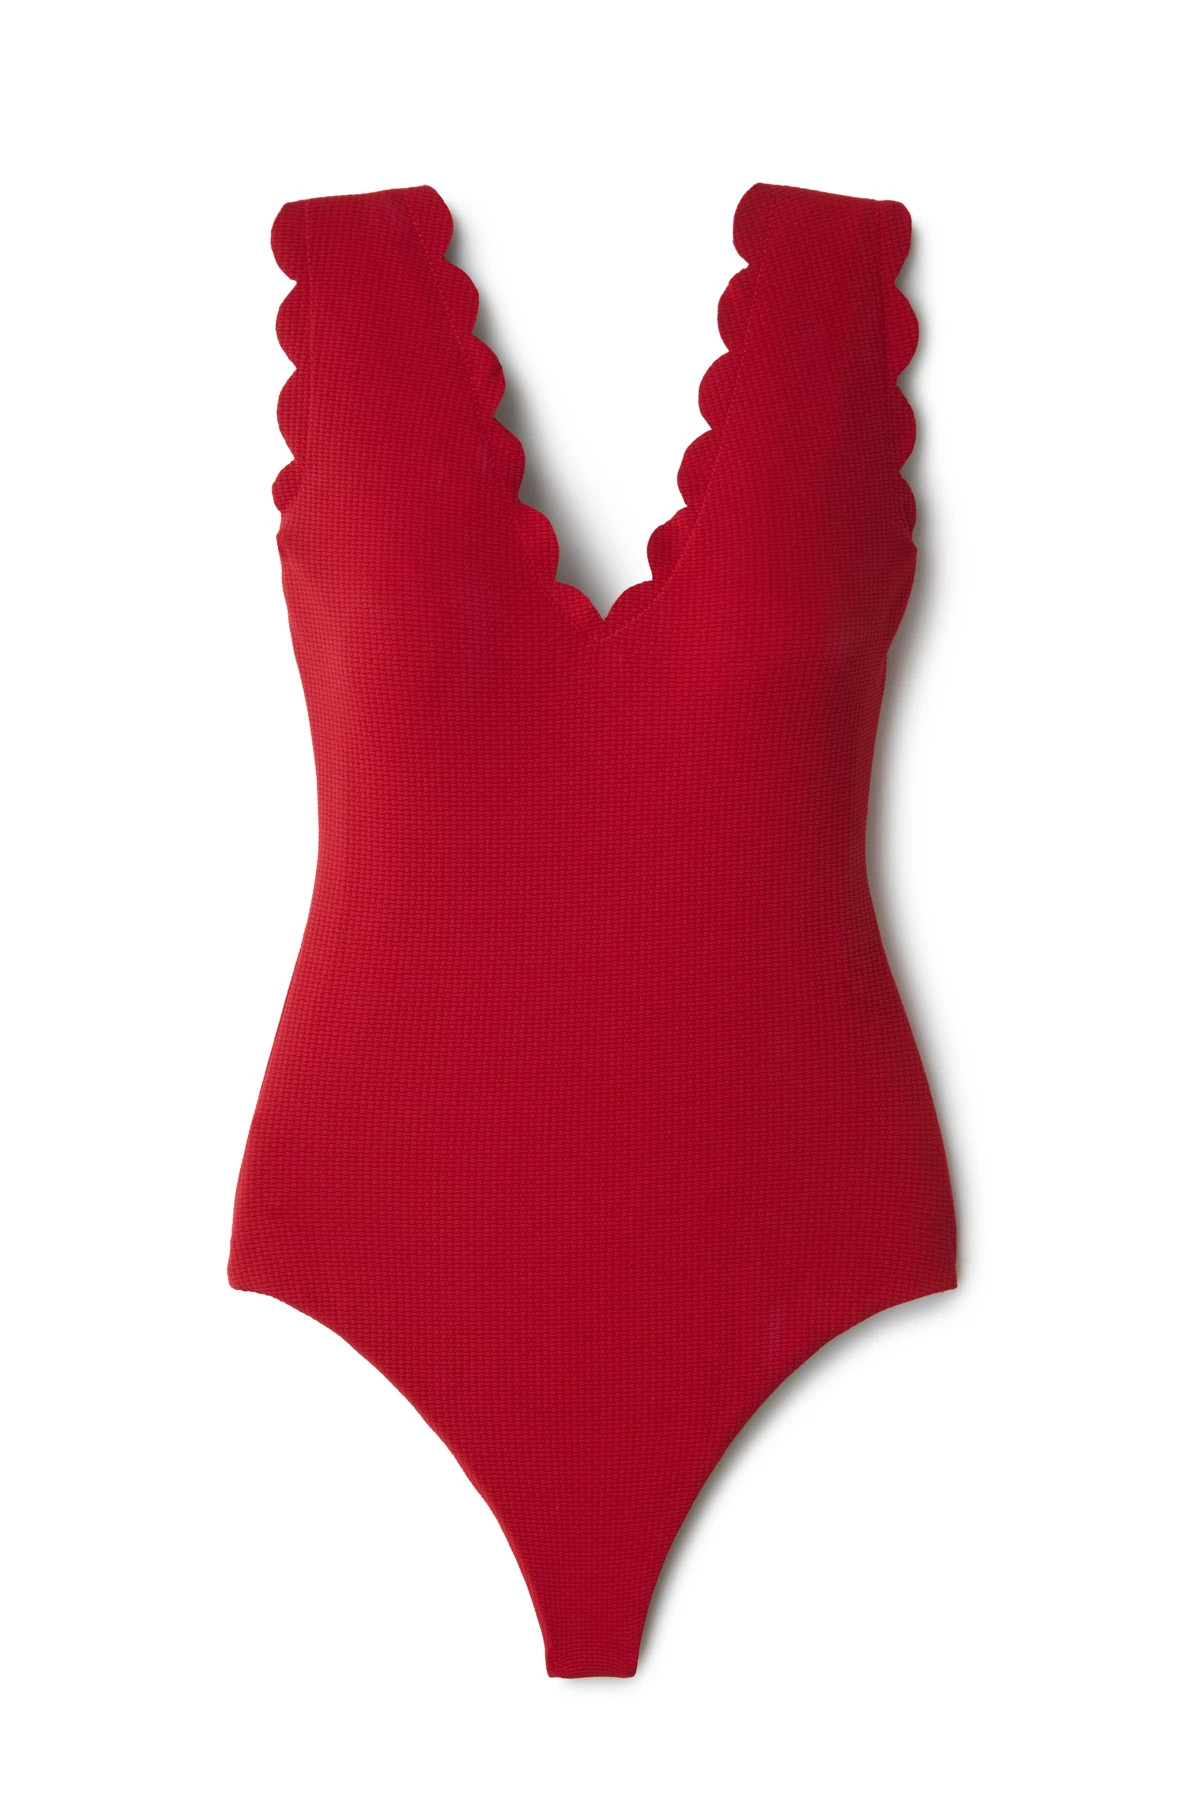 SCOOTER/BEET Scallop One Piece Swimsuit image number 4